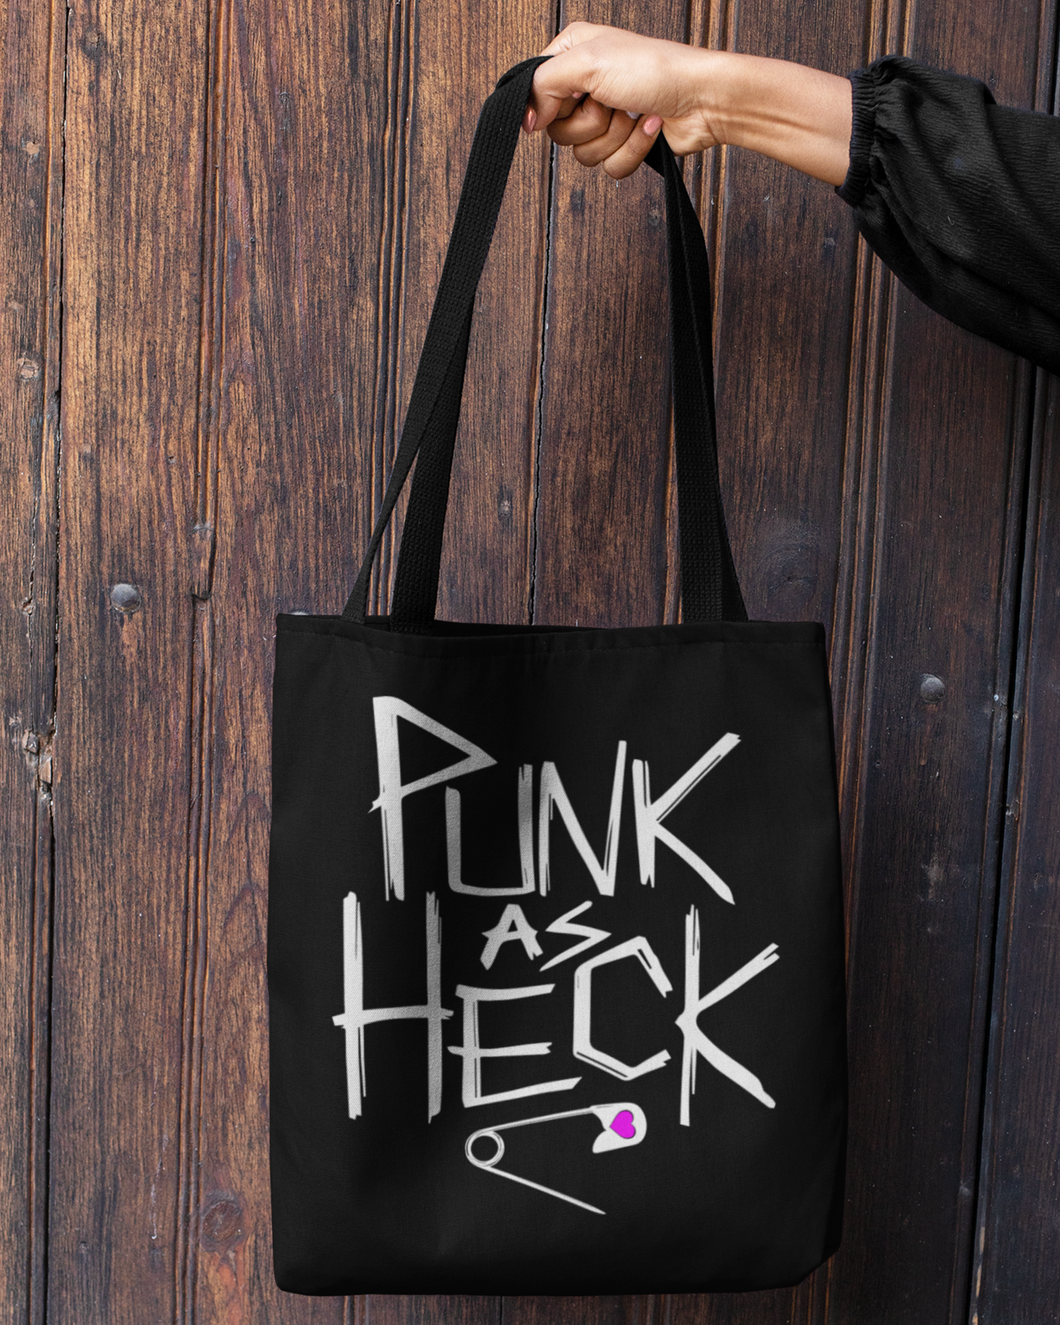 PUNK AS HECK - Open Safety Pin - Tote Bag